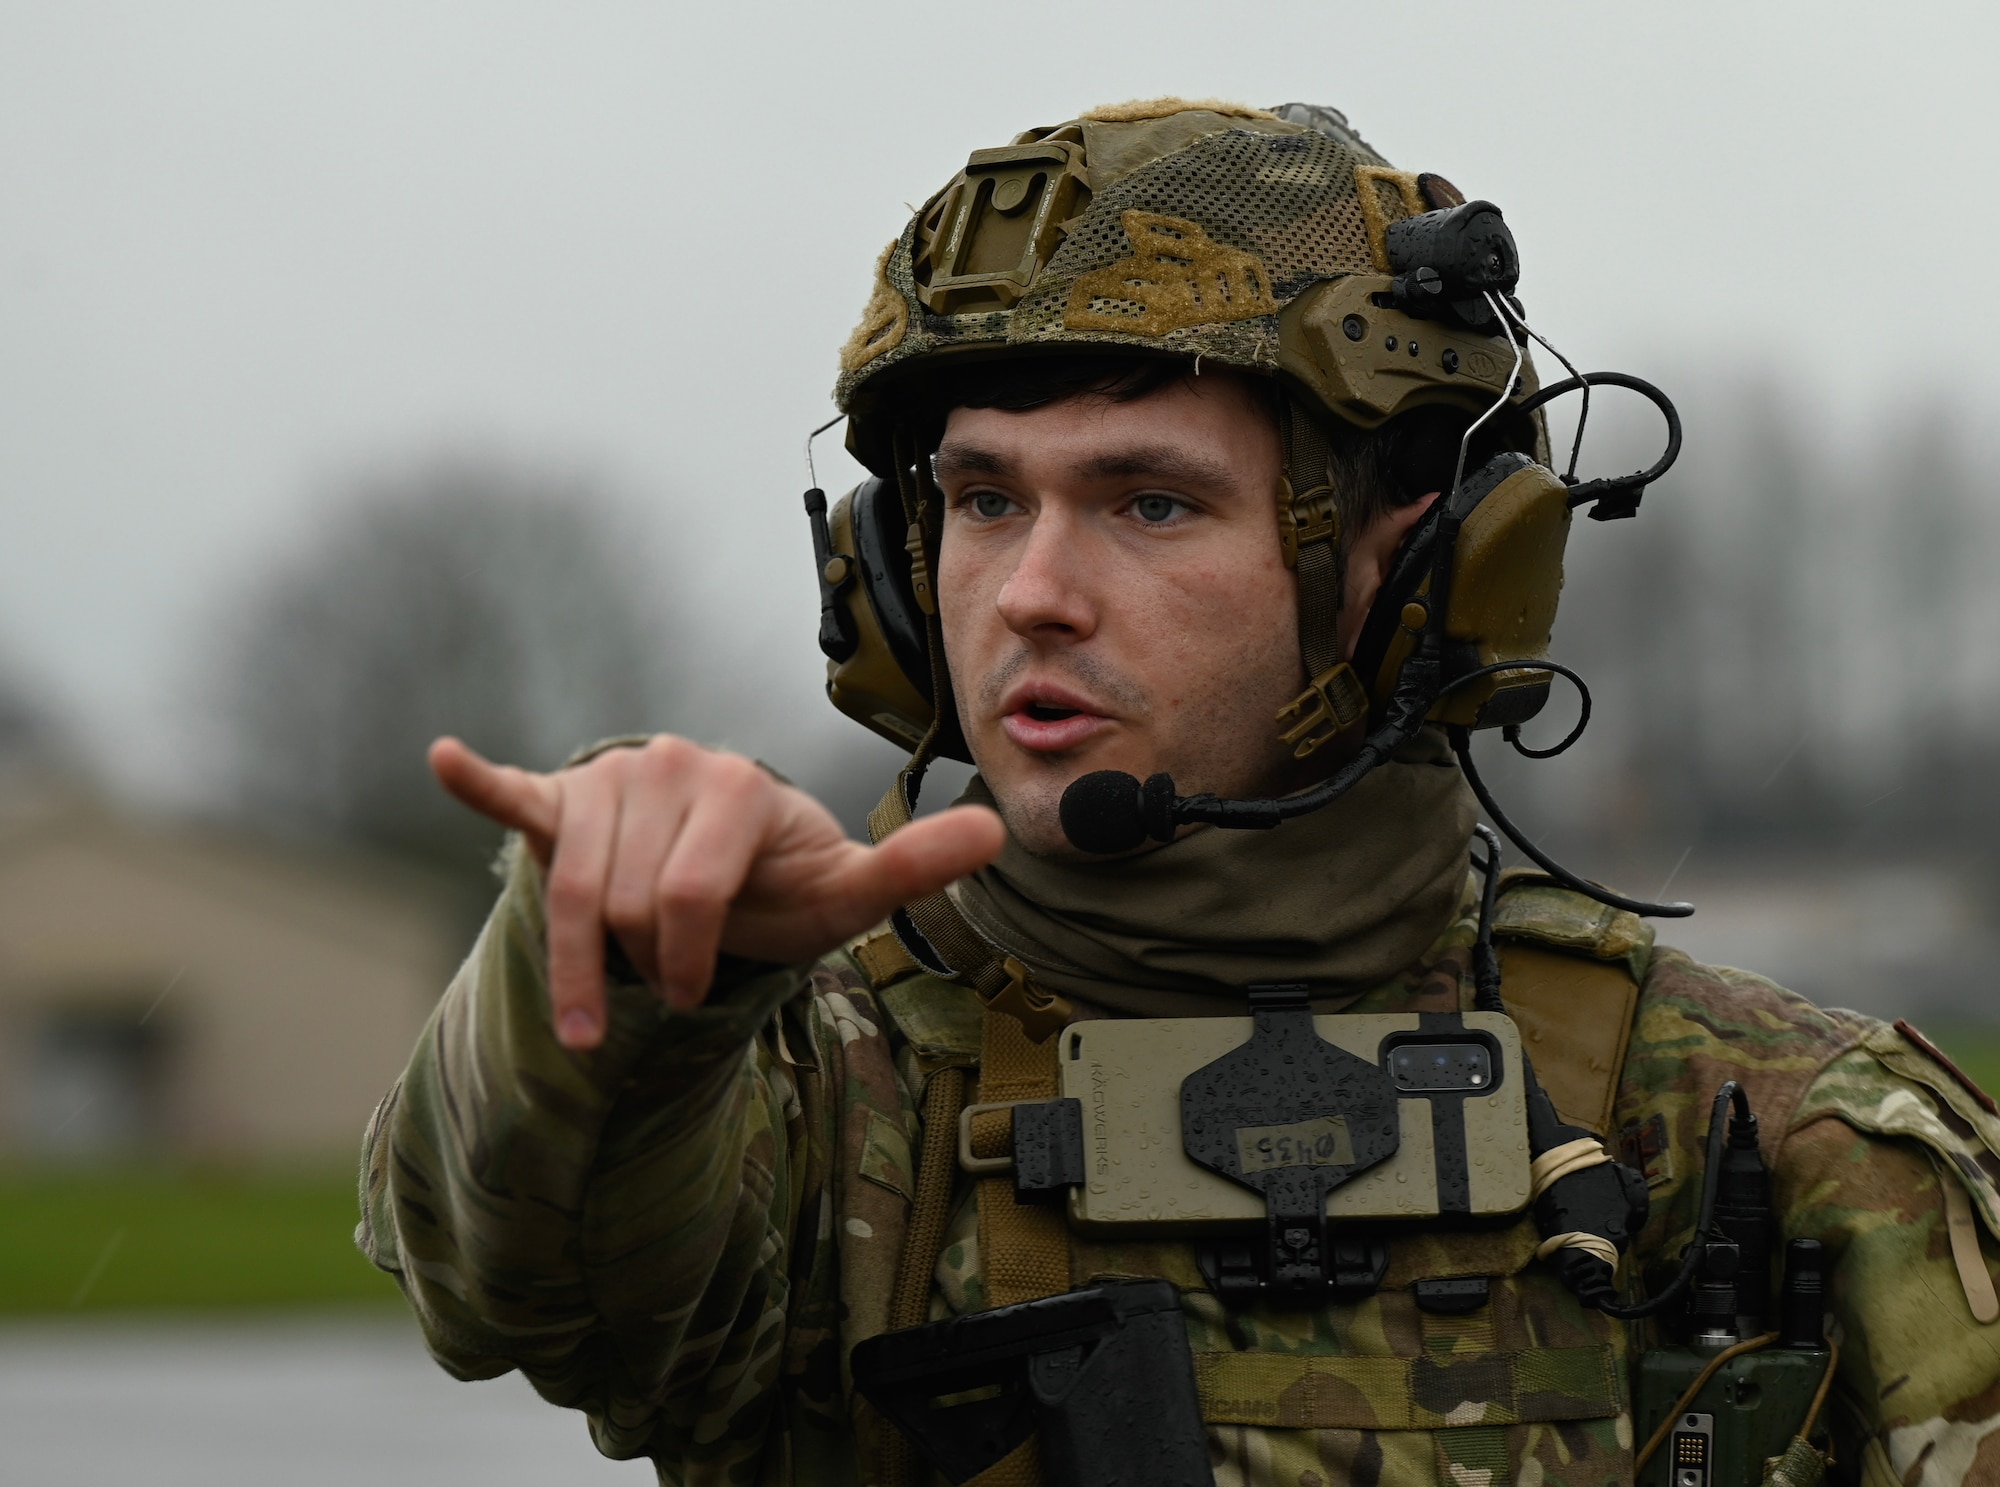 U.S. Air Force Tech. Sgt. Trevor Coady, 435th Security Forces Squadron team chief, briefs his team on a mission objective during Exercise Agile Bison 23-1 at Chièvres Air Base, Belgium, March 7, 2023. His mission was to conduct an assault, with a four-man team, on an objective which is a short, violent, but well-ordered attack against an enemy.